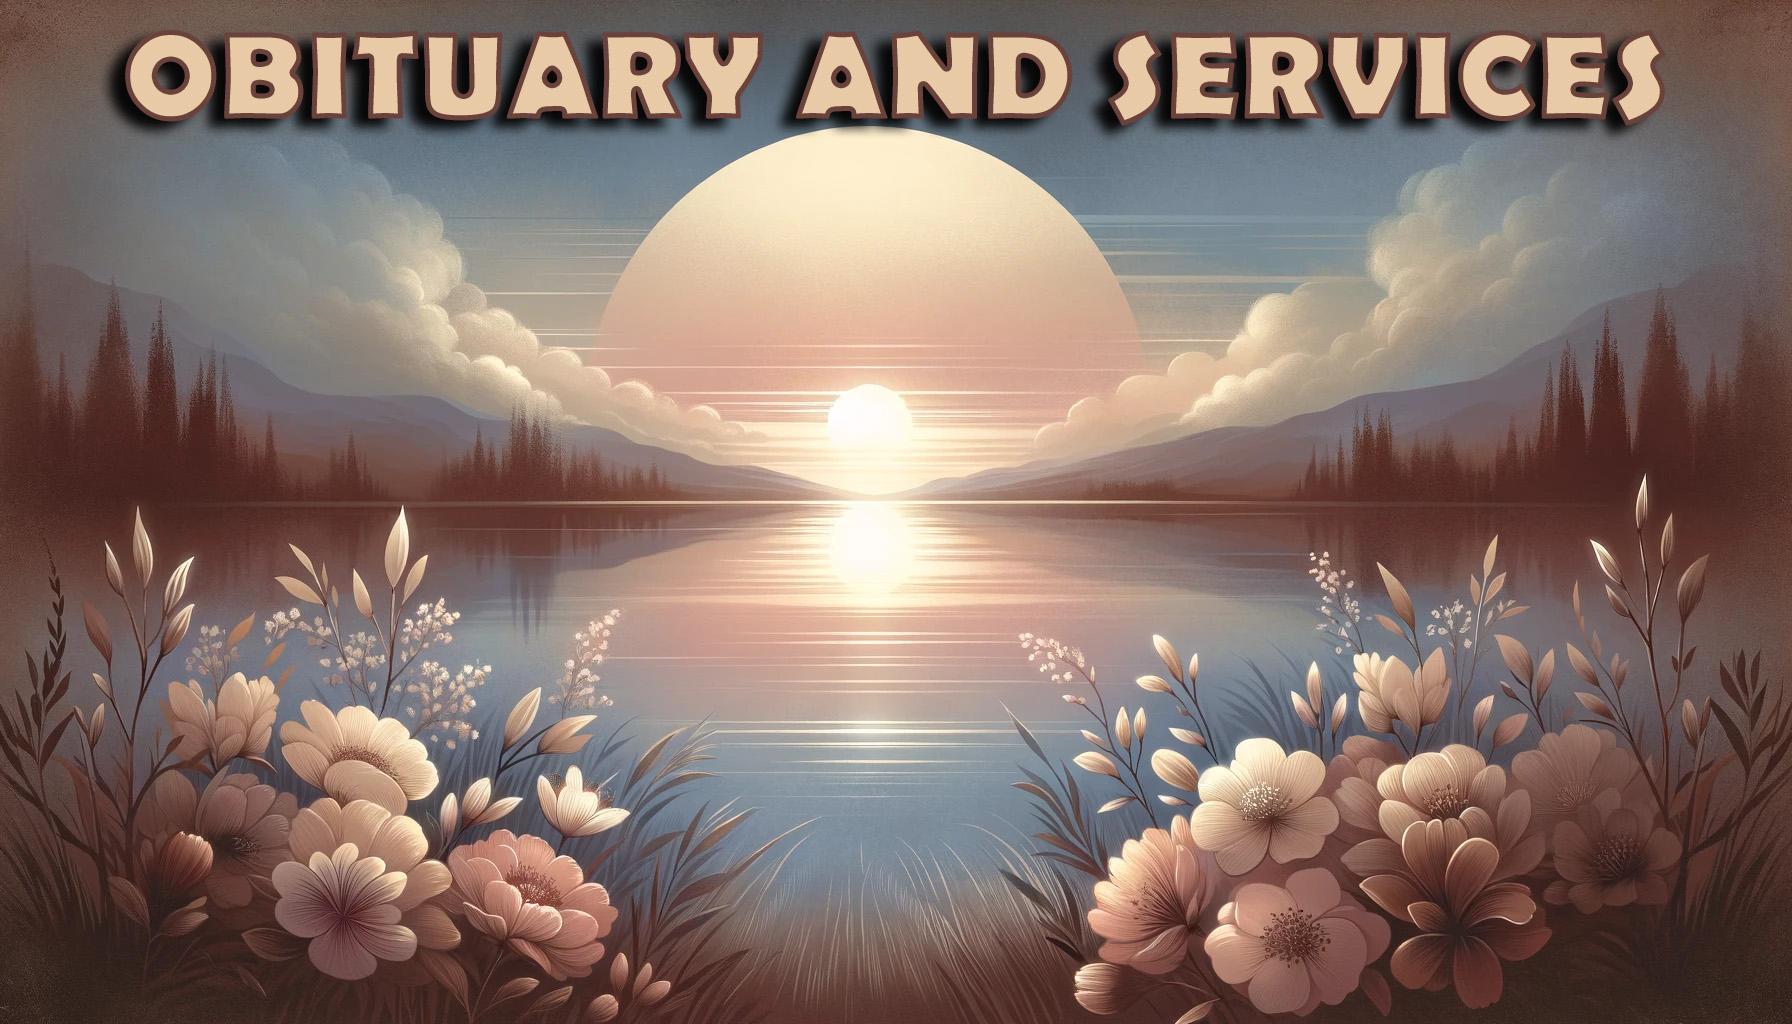 Obituary & Services News Graphic